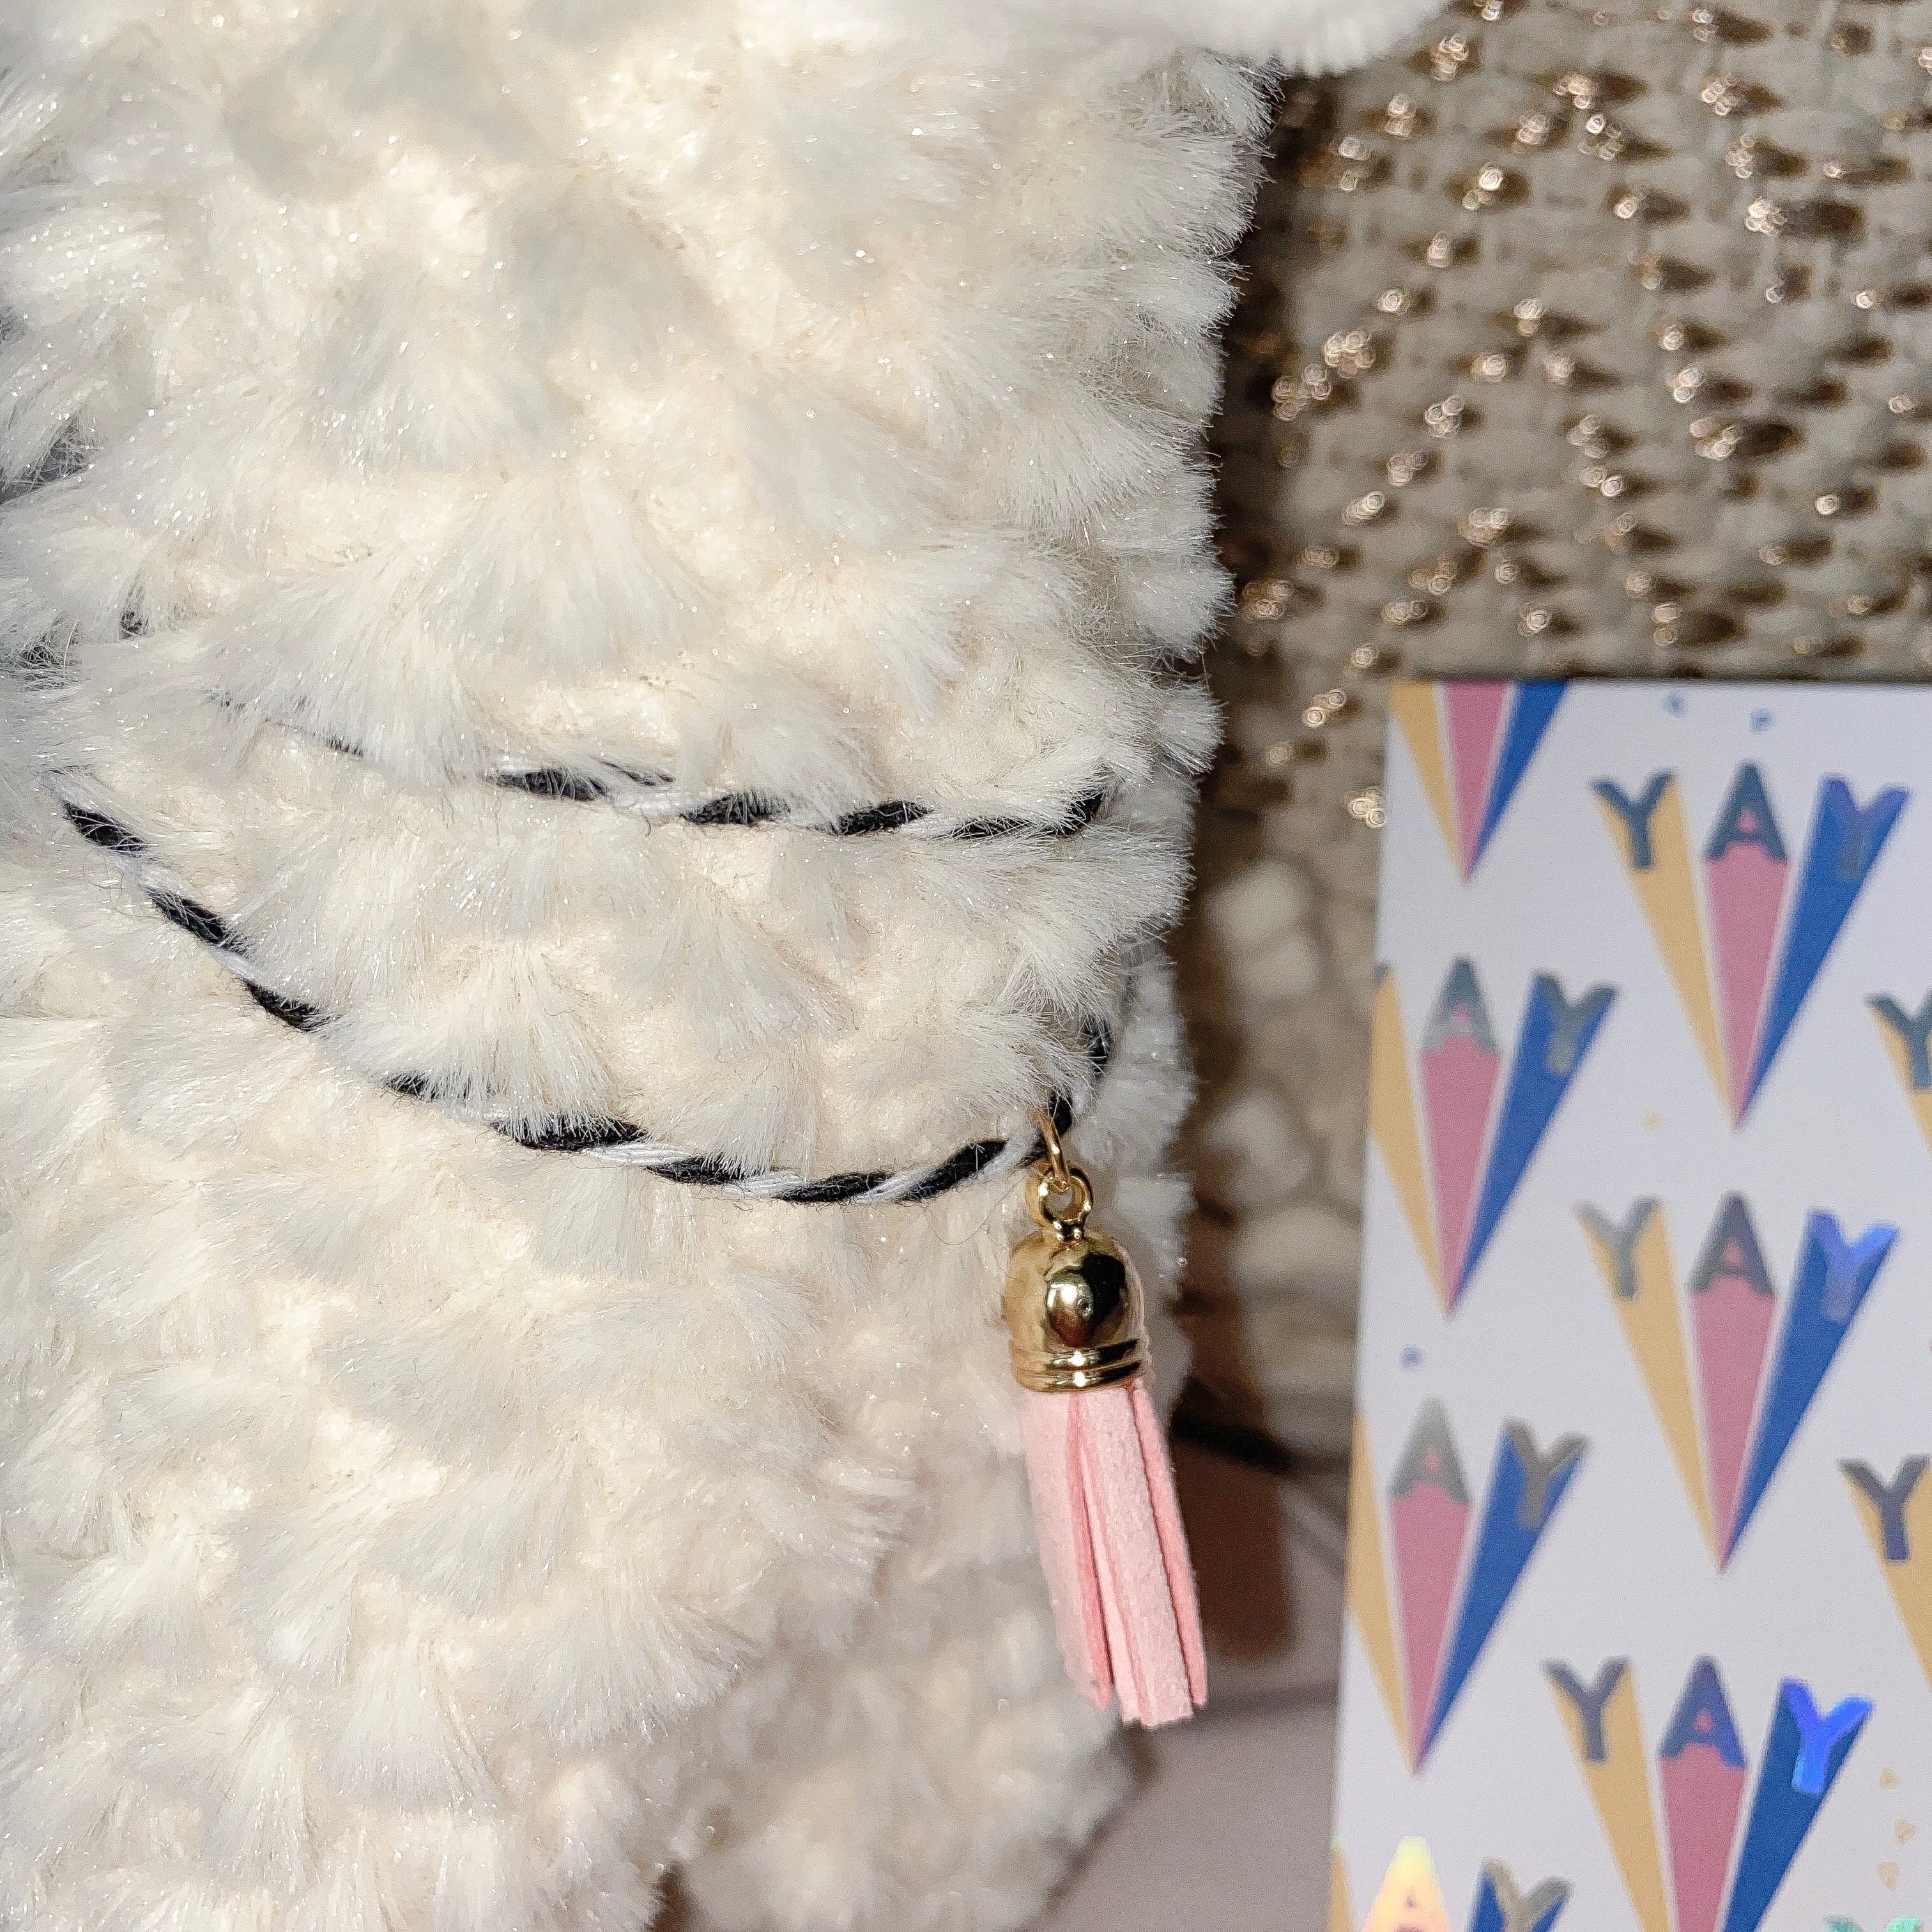 Each personalized llama comes with a tassel necklace and note card.